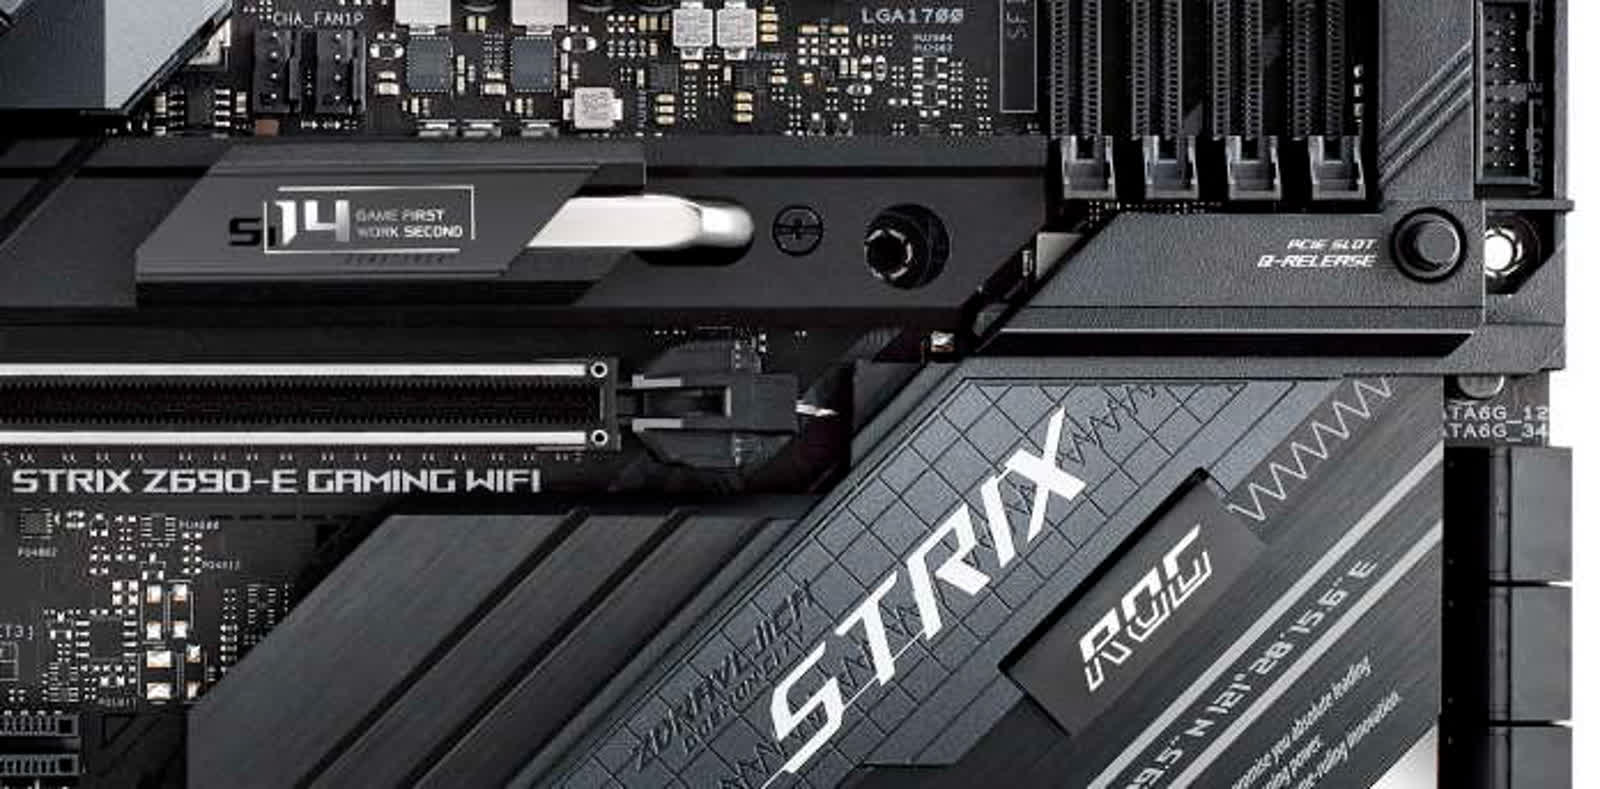 Having trouble removing a GPU? New Asus release button will make it easier to swap graphics cards